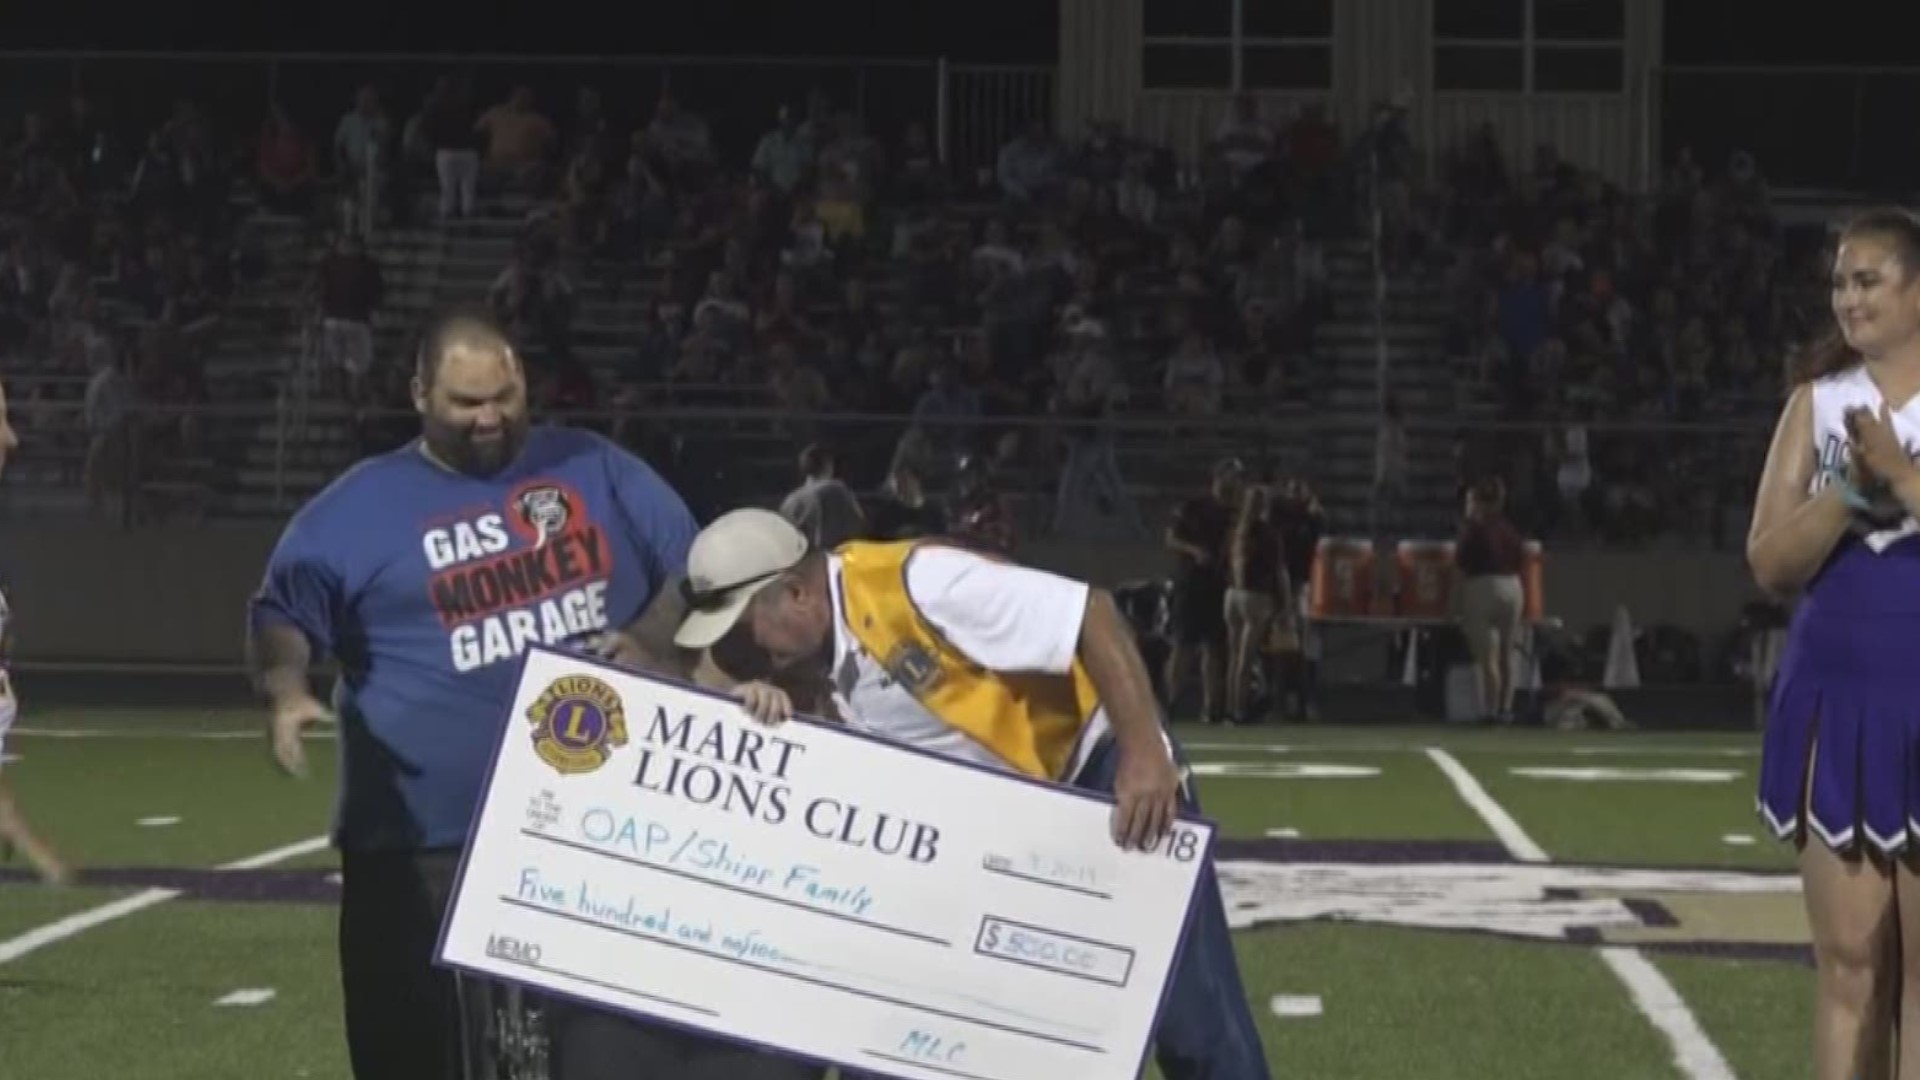 The Mart Lions Club presented David and Amanda Shipp with a $500 check along with donations, including furniture, at Friday night's football game.